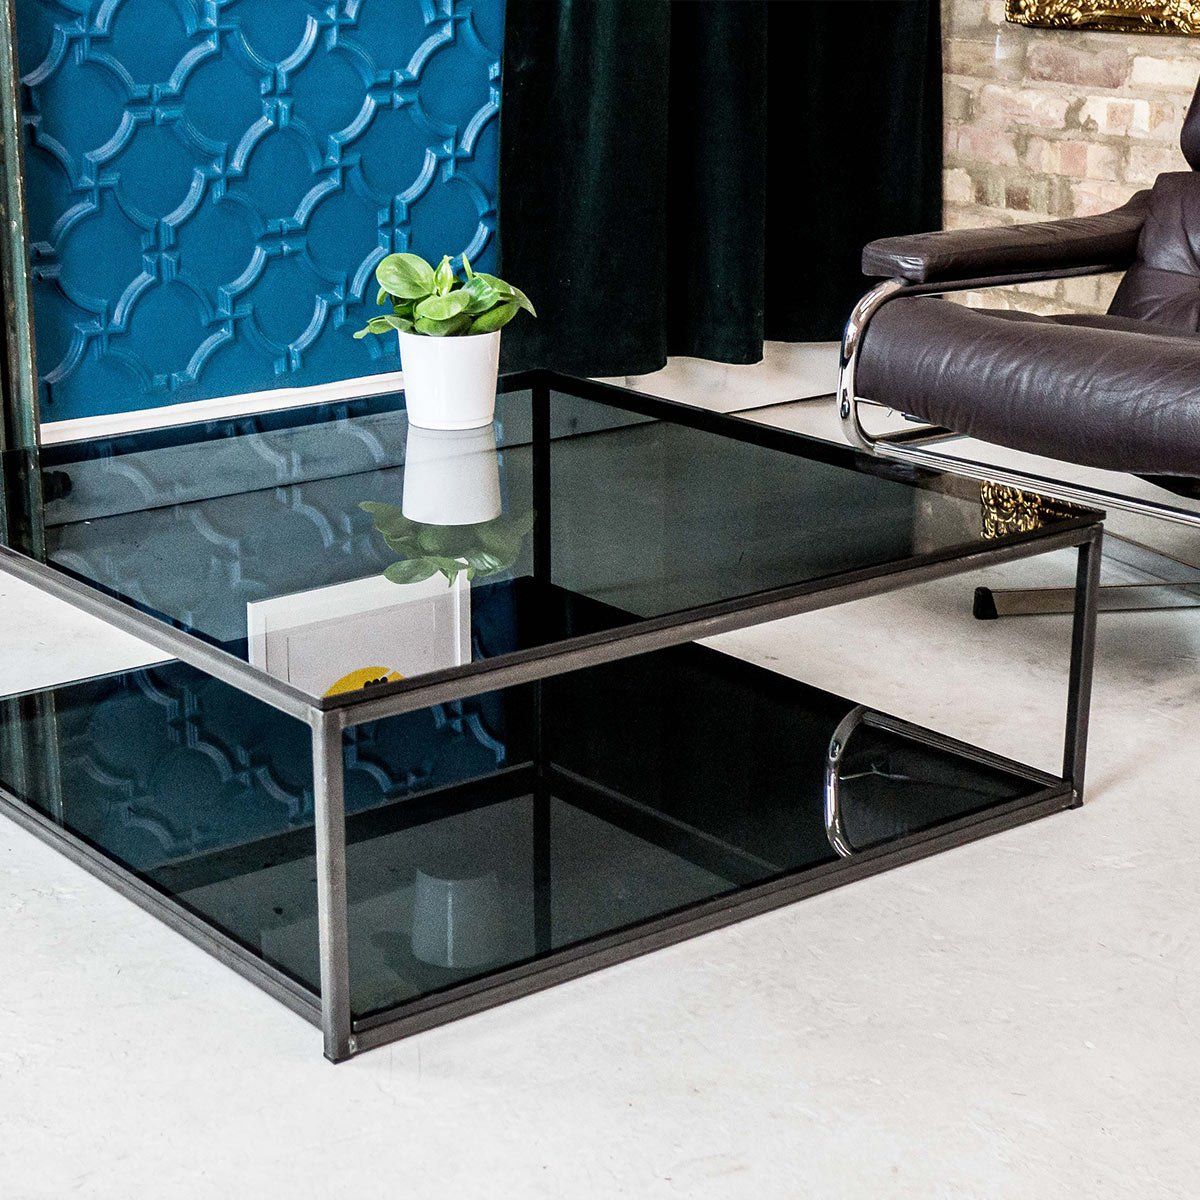 Glass Coffee Tables With Lower Shelves In Most Current Cubic Industrial Glass Coffee Table With Shelf – Klarity – Glass Furniture (View 13 of 15)